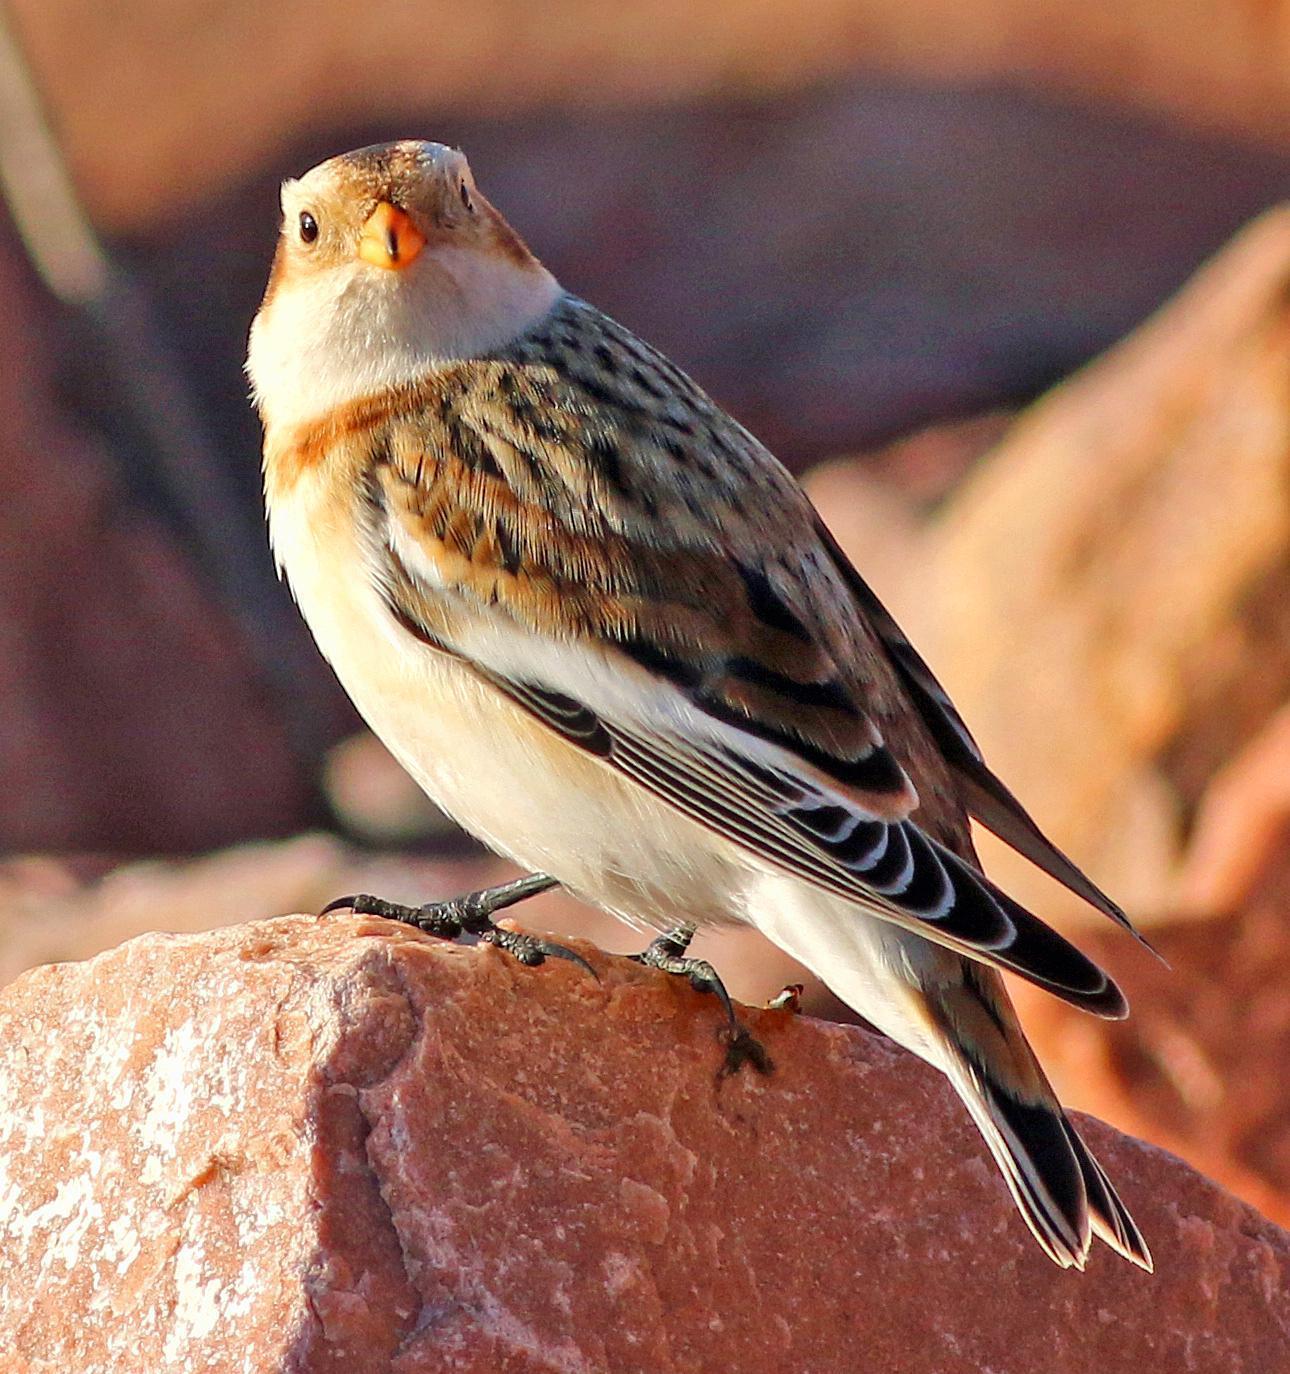 Snow Bunting Photo by Tom Gannon